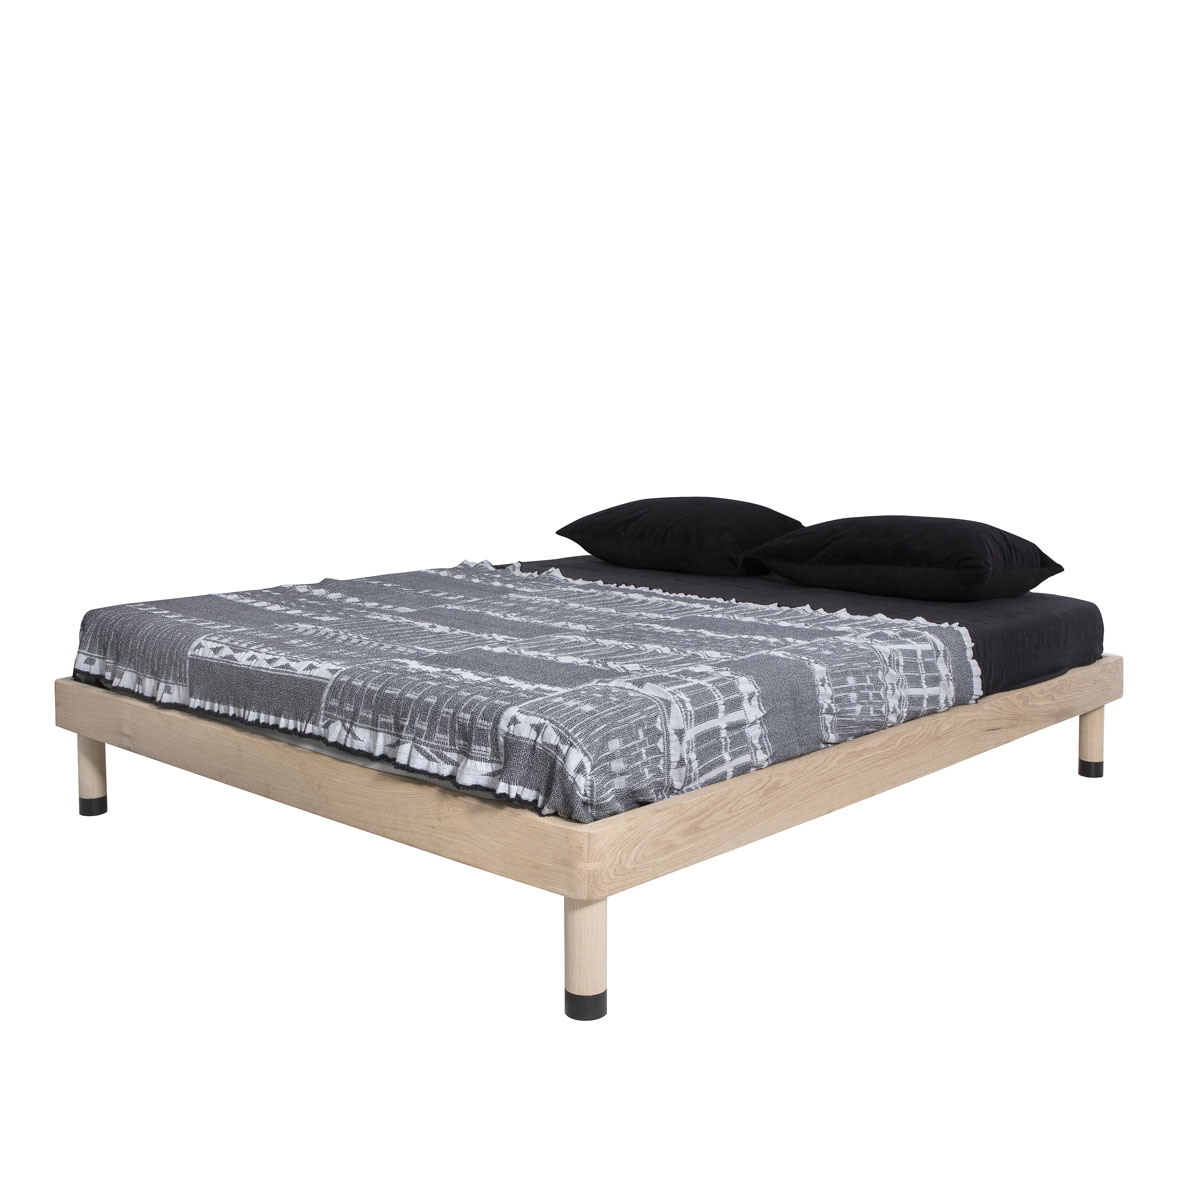 Bed Base With Turned Legs And Black, How To Cover Bed Frame Legs